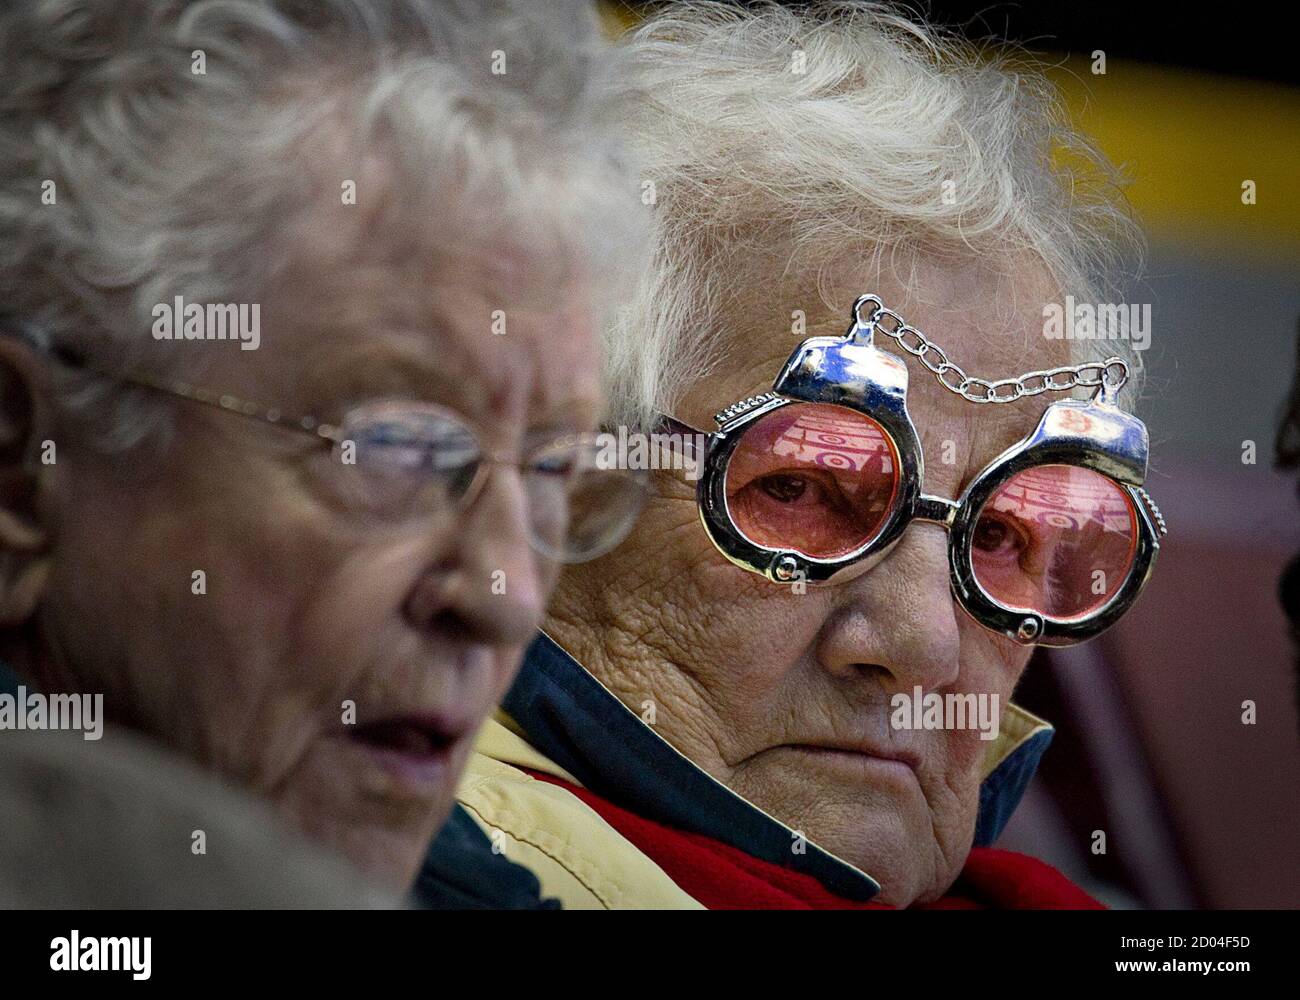 Curling fan Audrey Jasper wears sunglasses designed like handcuffs while  attending the World Men's Curling Championships in Victoria, British  Columbia April 2, 2013. When asked why she wore sunglasses of that  particular